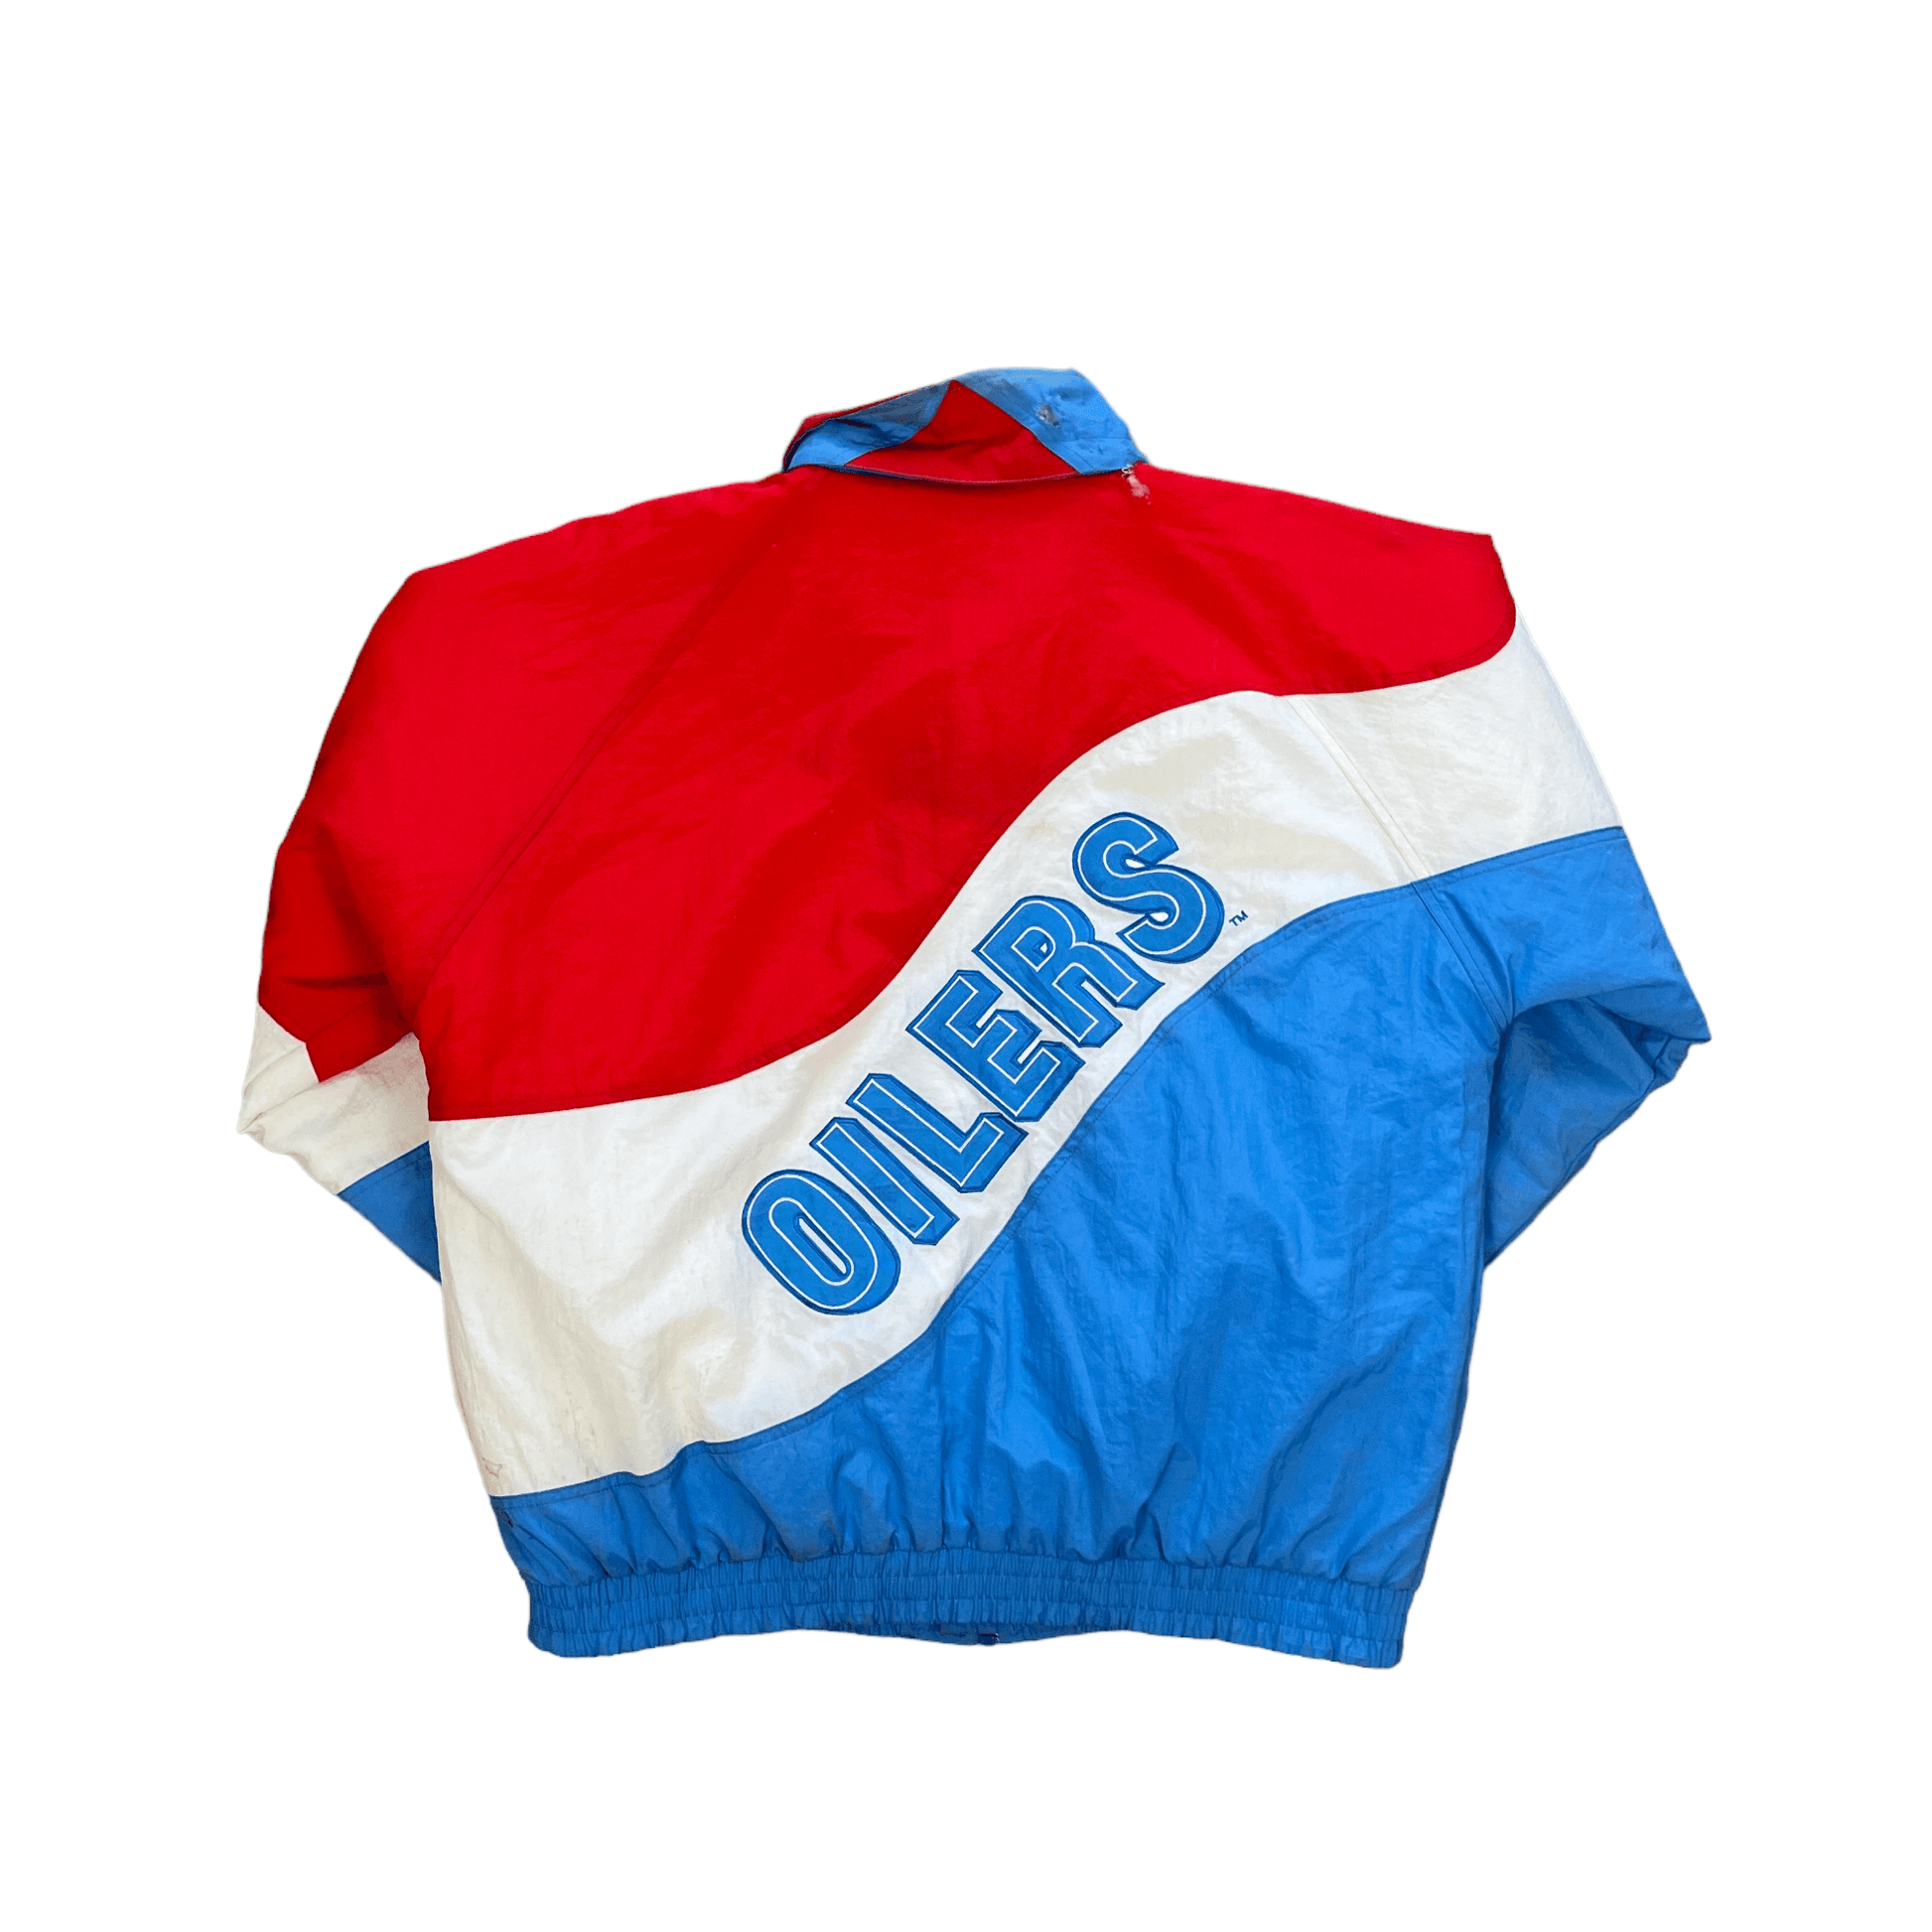 Vintage 90s Red, White + Blue NFL Oilers Puffer Coat - Large - The Streetwear Studio